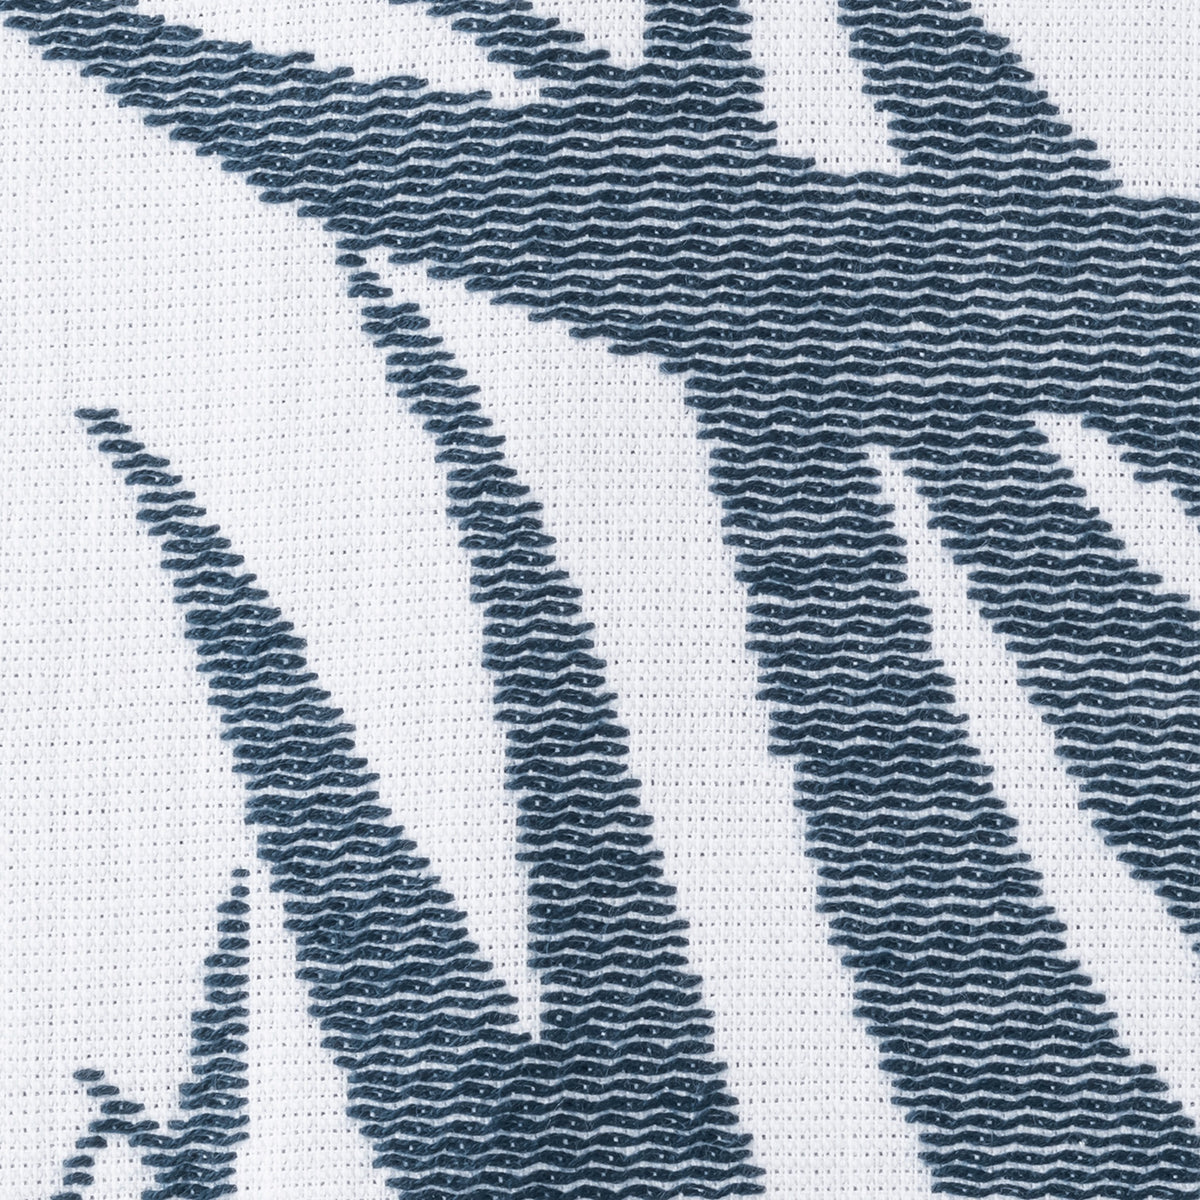 Swatch Sample of Matouk Zebra Palm Beach Towels in Color Navy